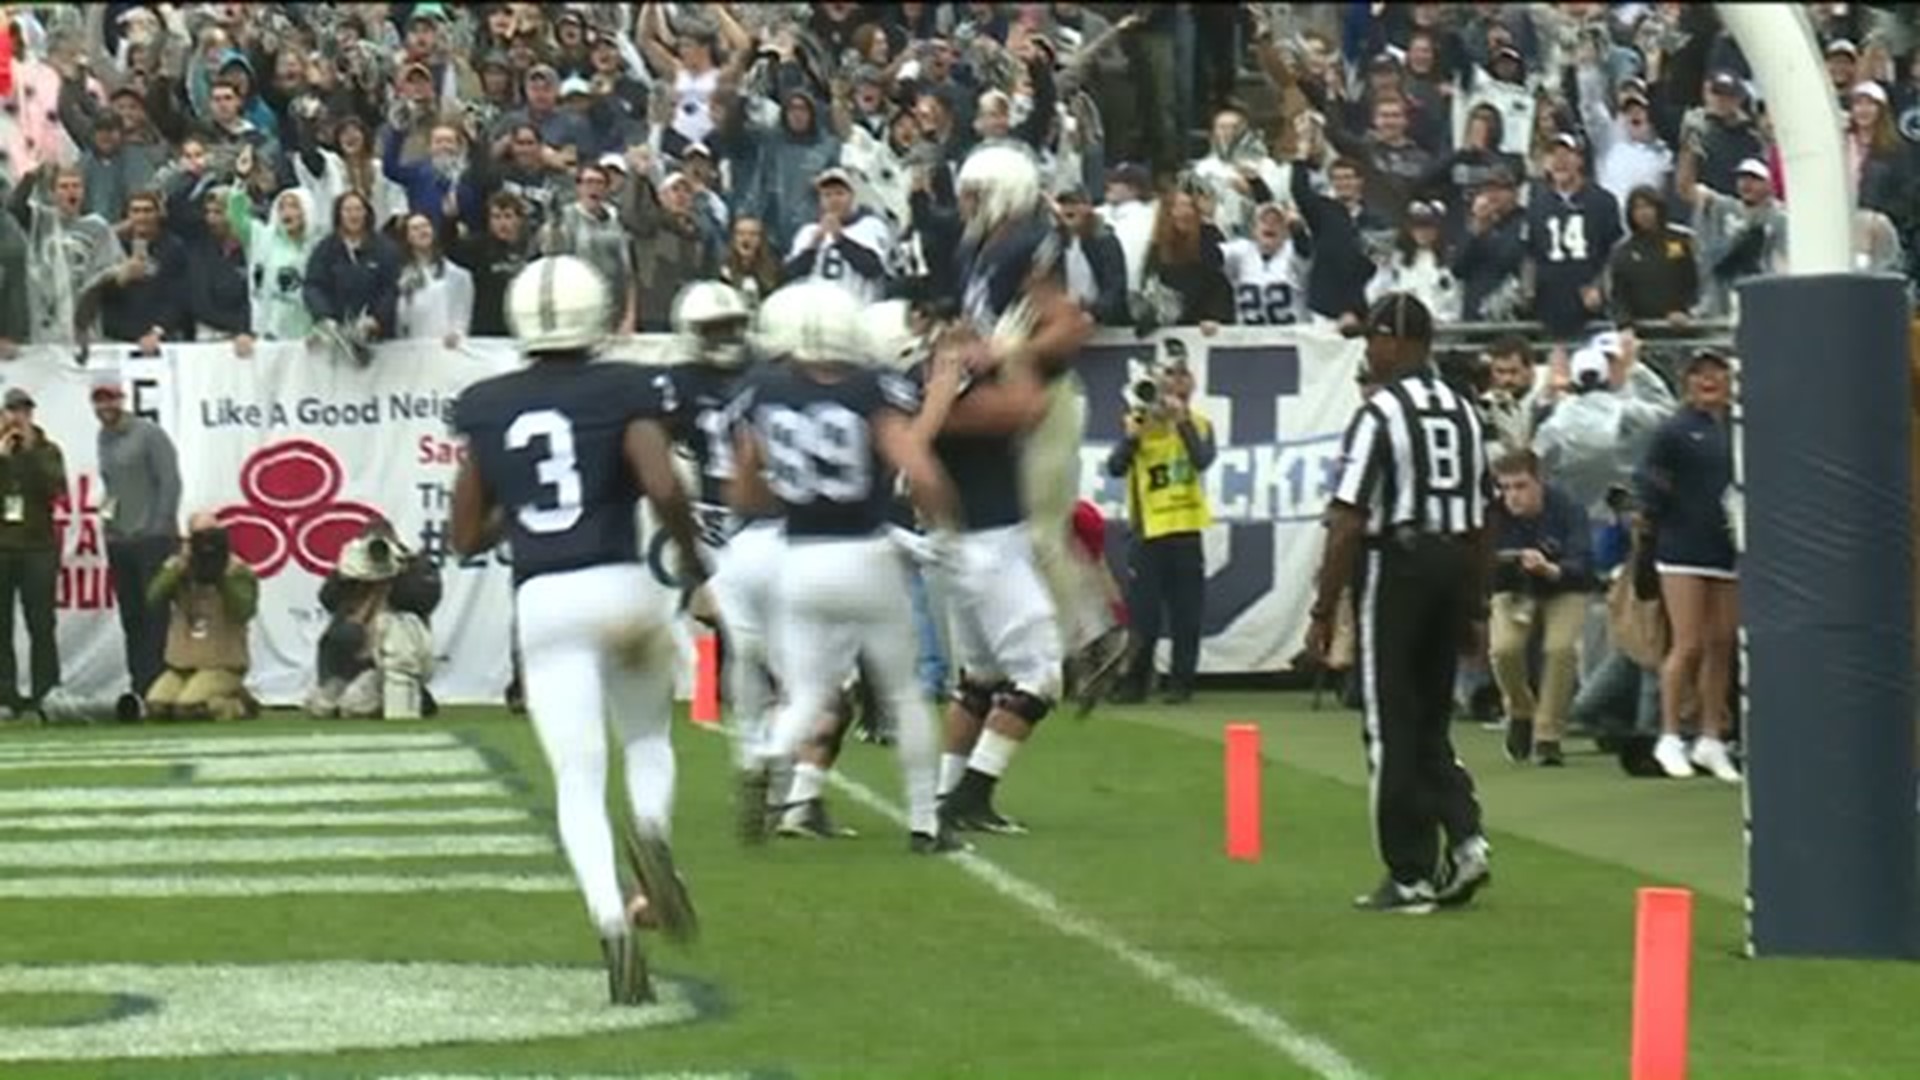 McSorley Emerging For Nittany Lions